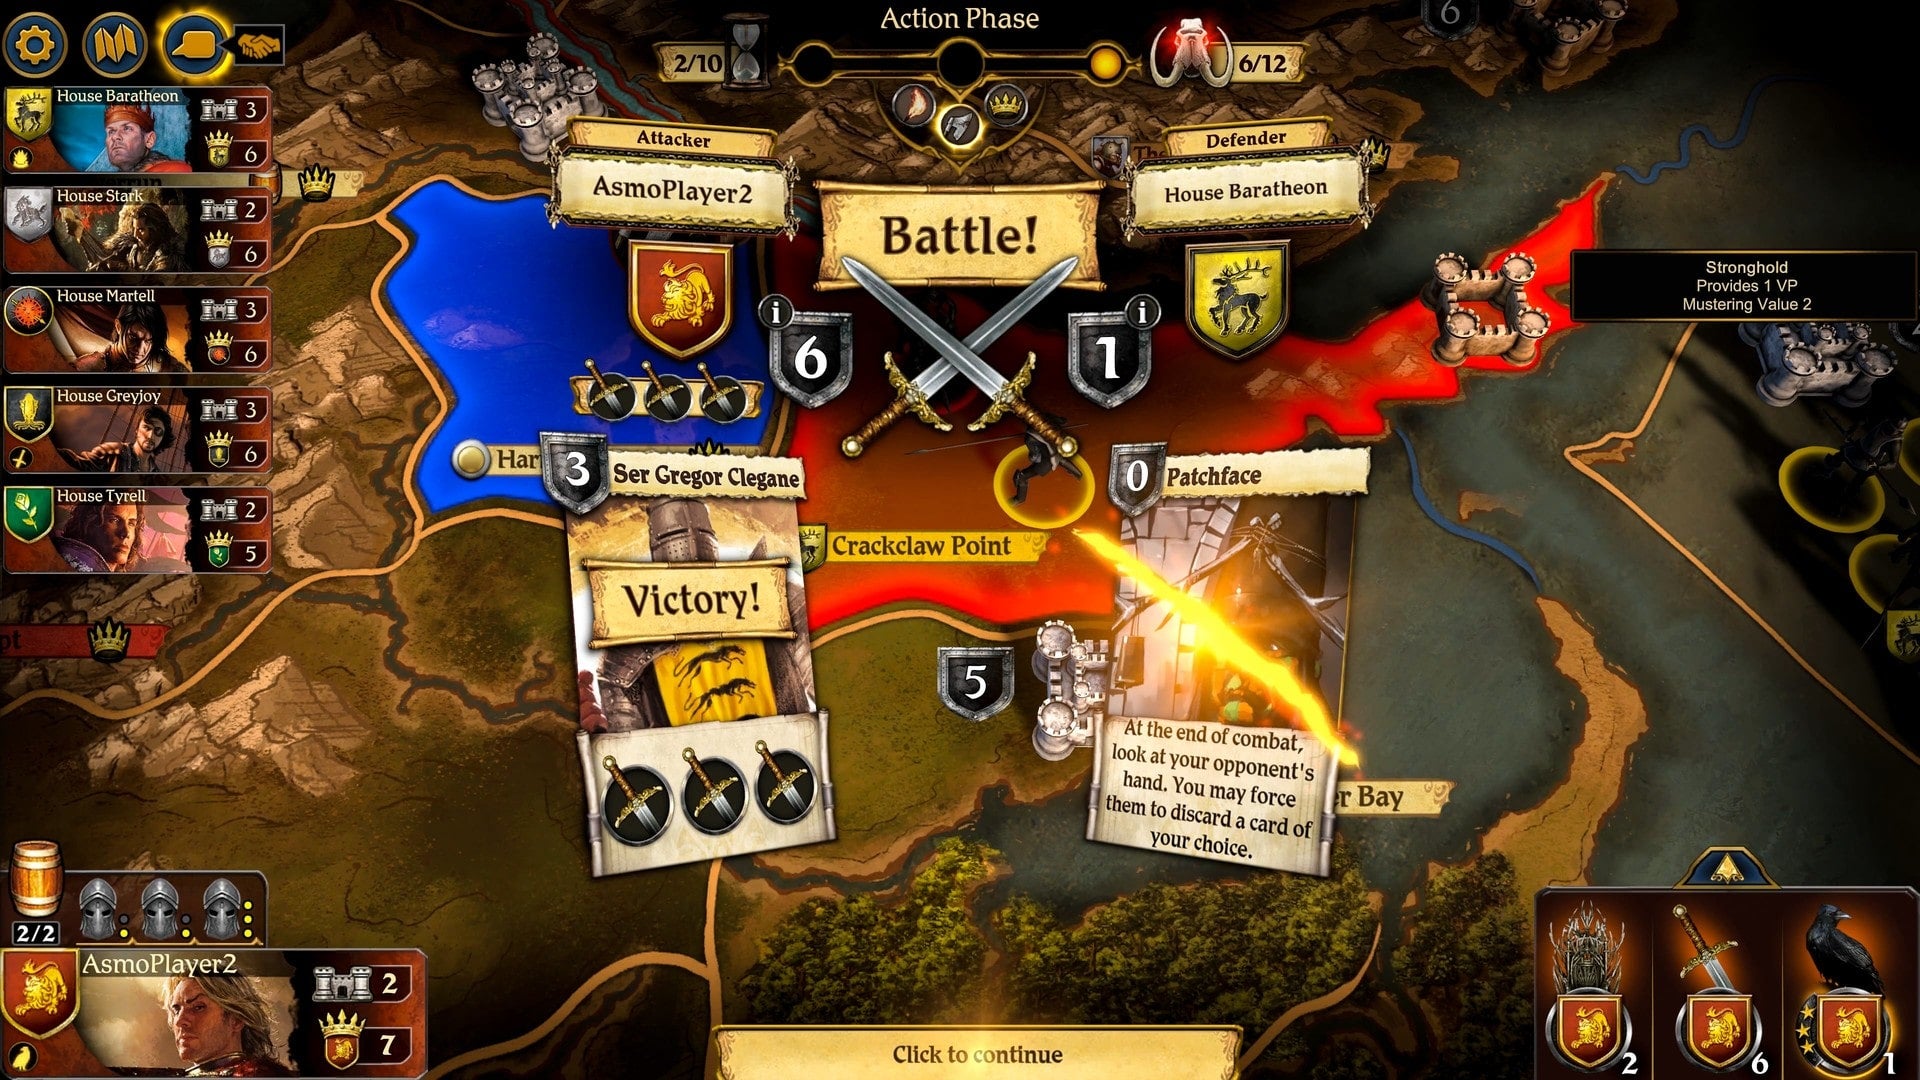 Image for The Game of Thrones board game is free on PC until next week